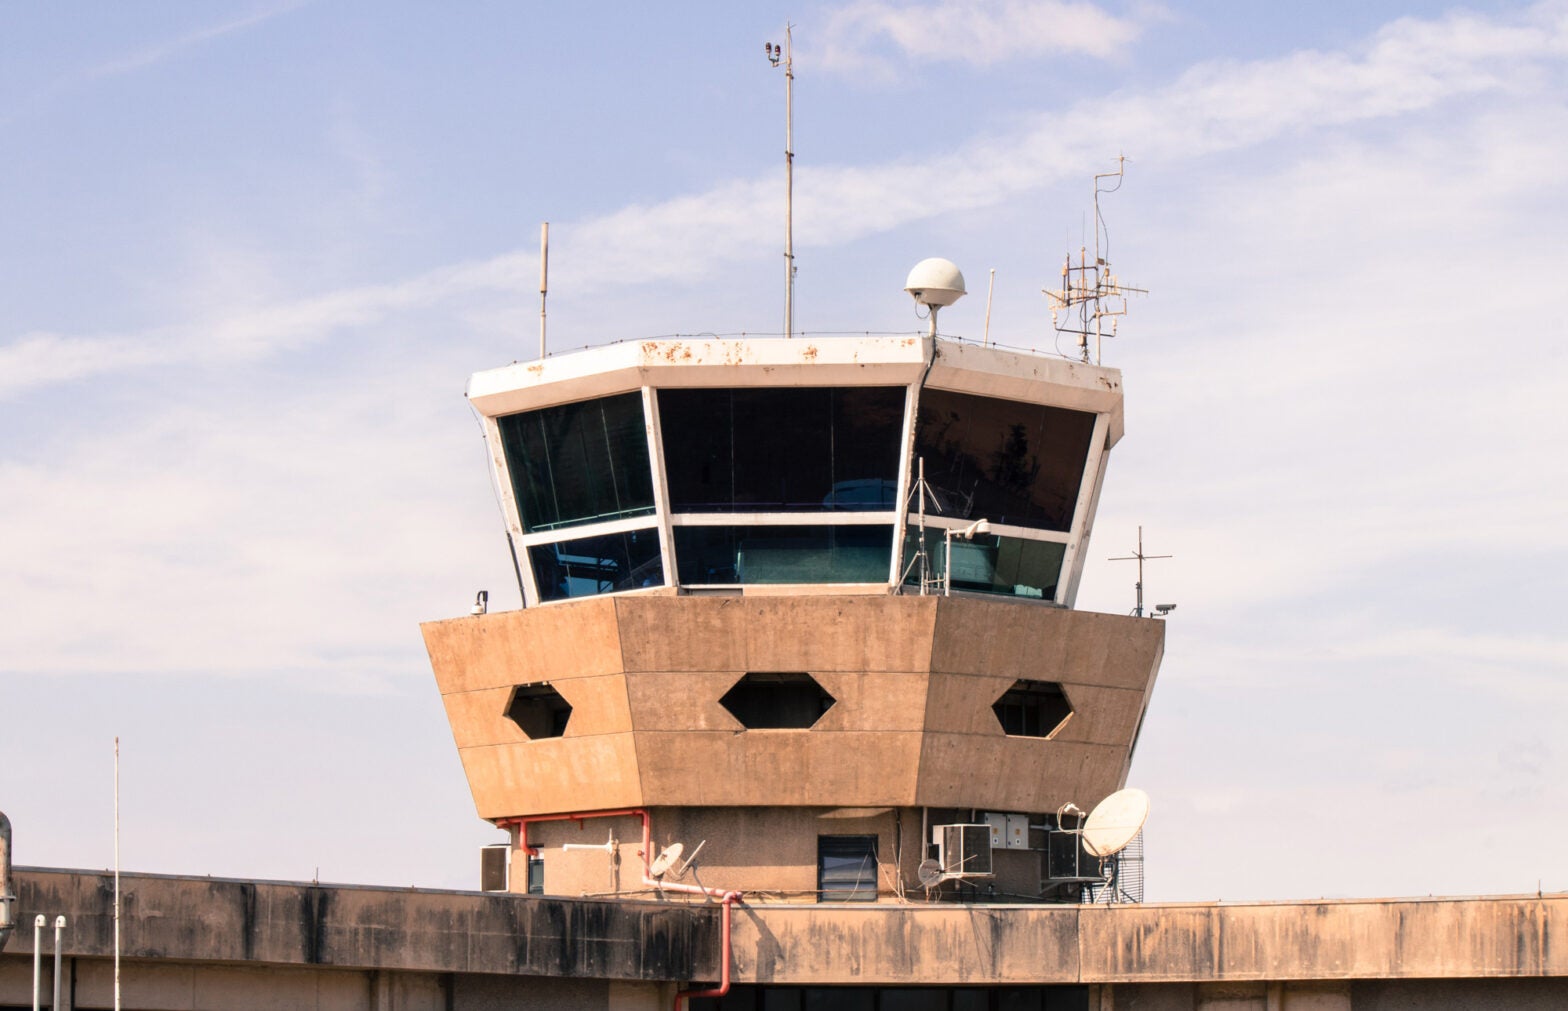 Report Says Contract Towers Are Safe, Cost Less Than FAA Facilities